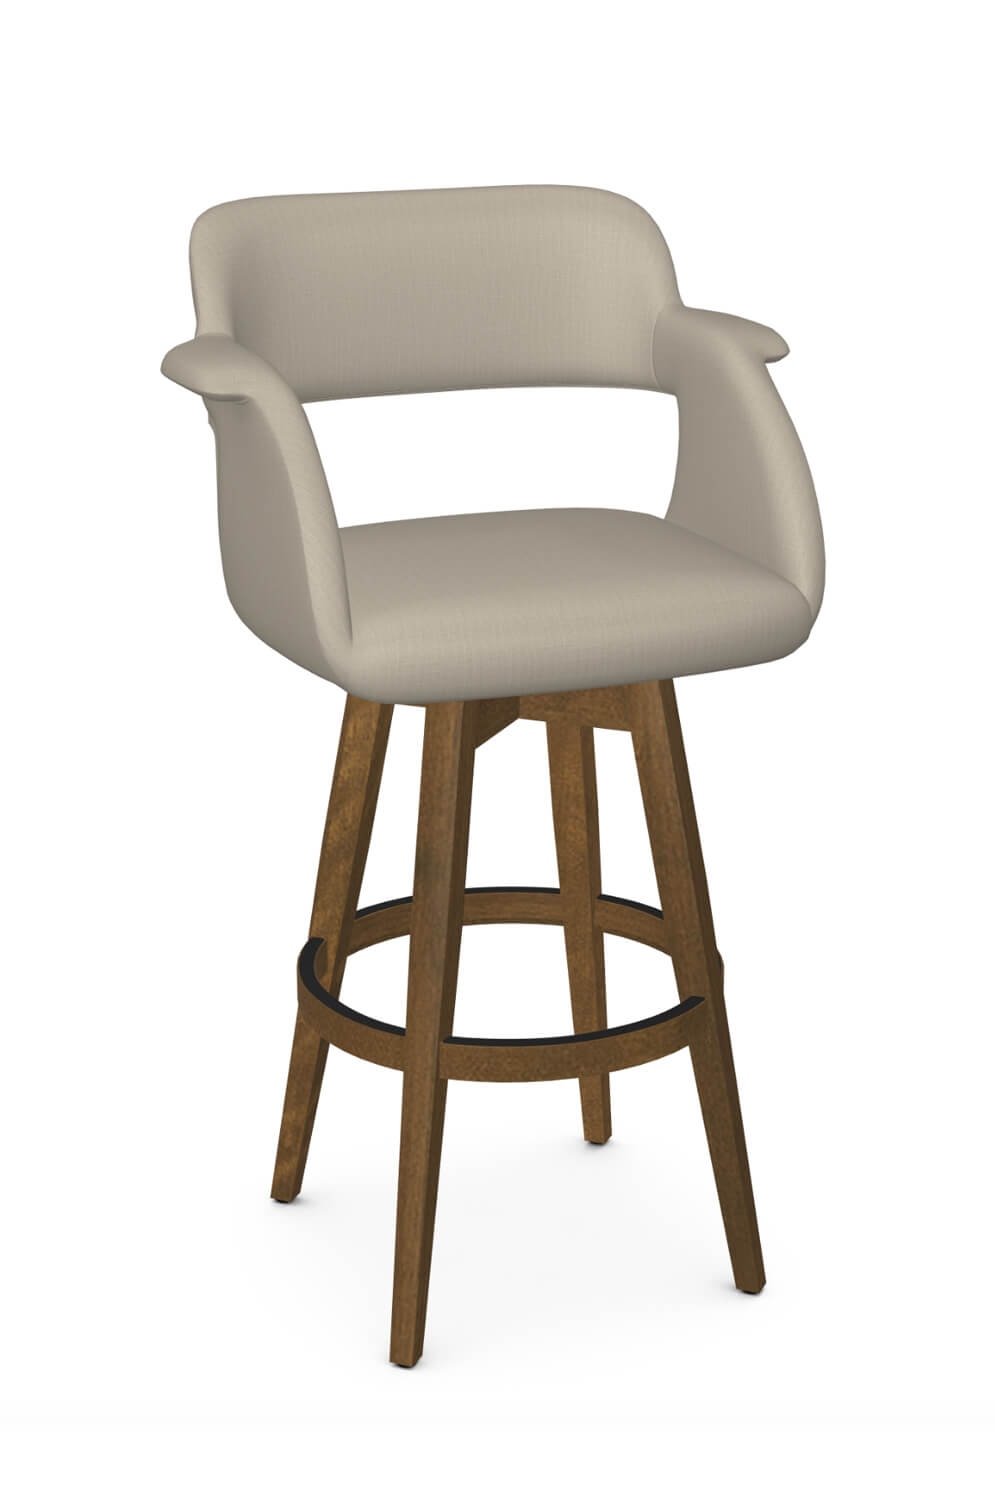 Joshua Upholstered Wood Swivel Stool, Bar Stools That Swivel And Have Arms